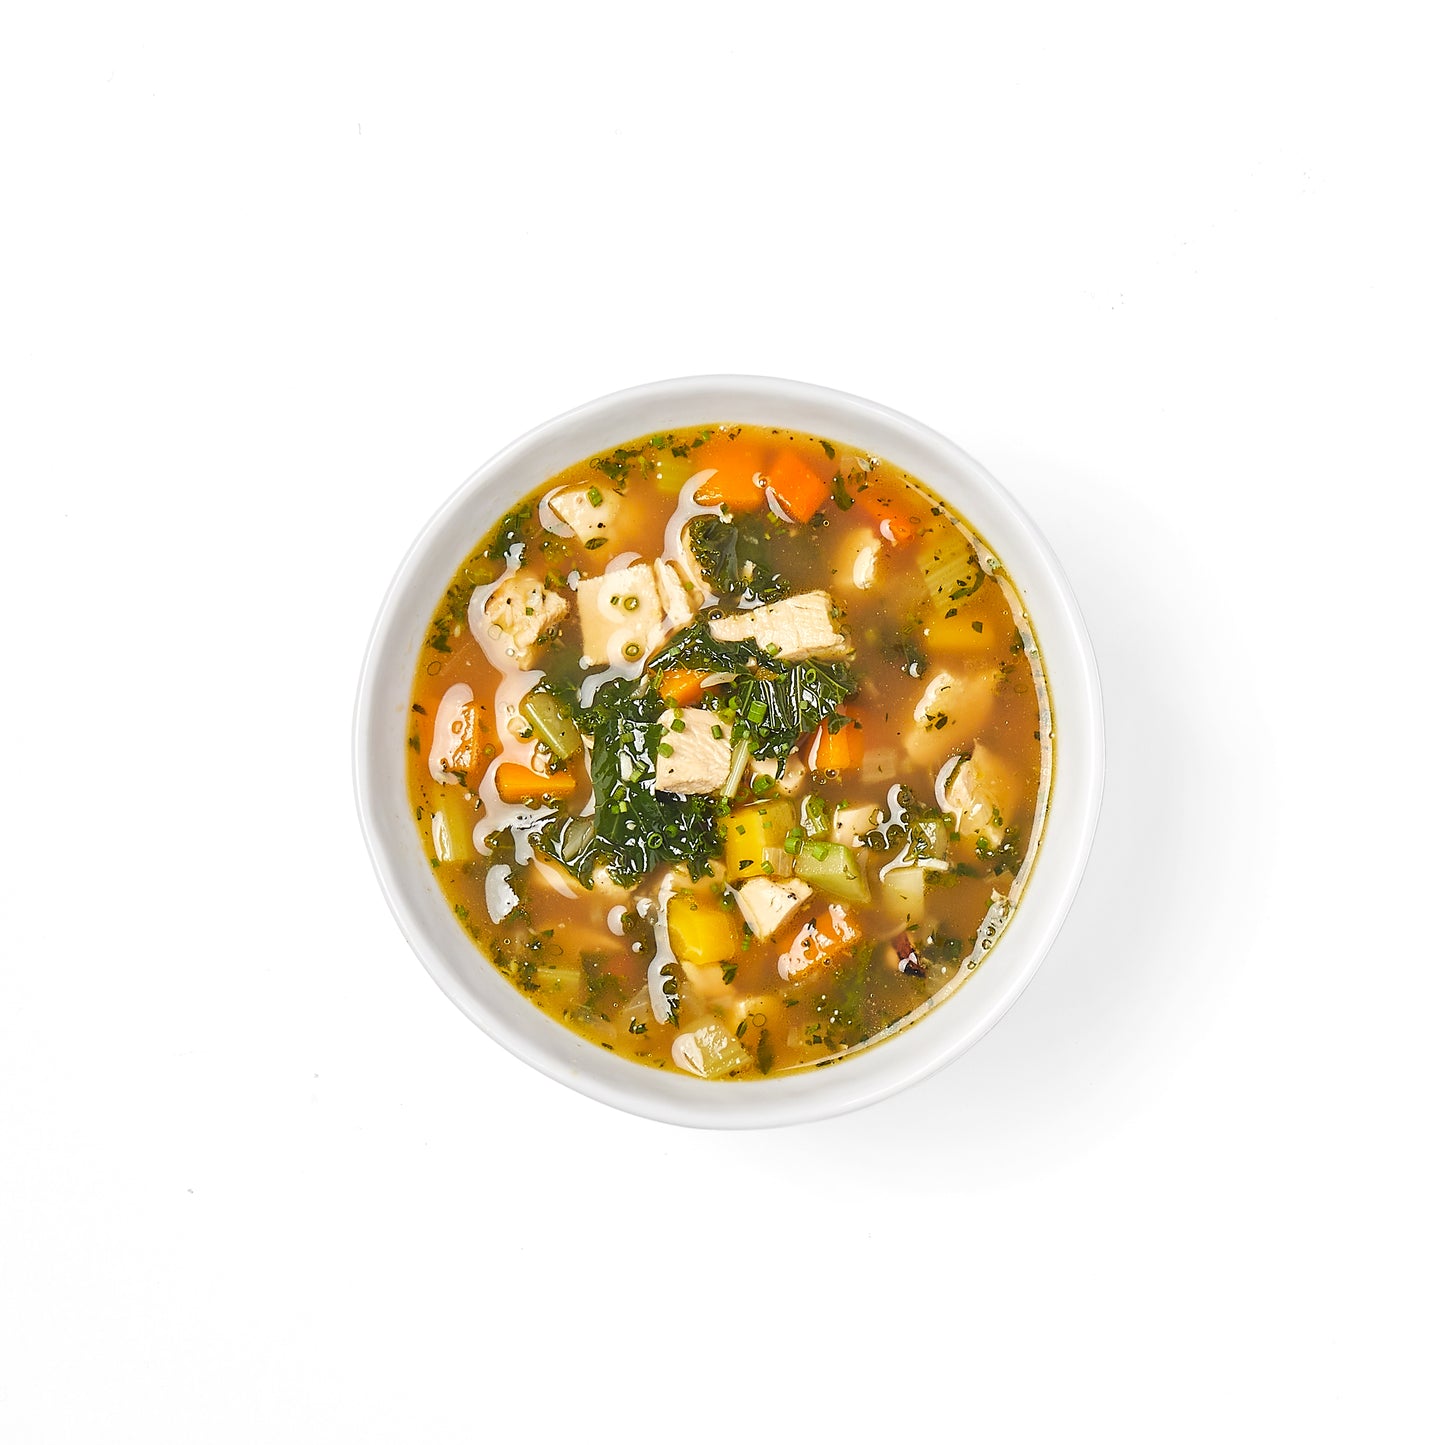 hearty chicken and vegetable stew azuluna foods Premium Pasture-Raised ready-to-eat Meals Delivery